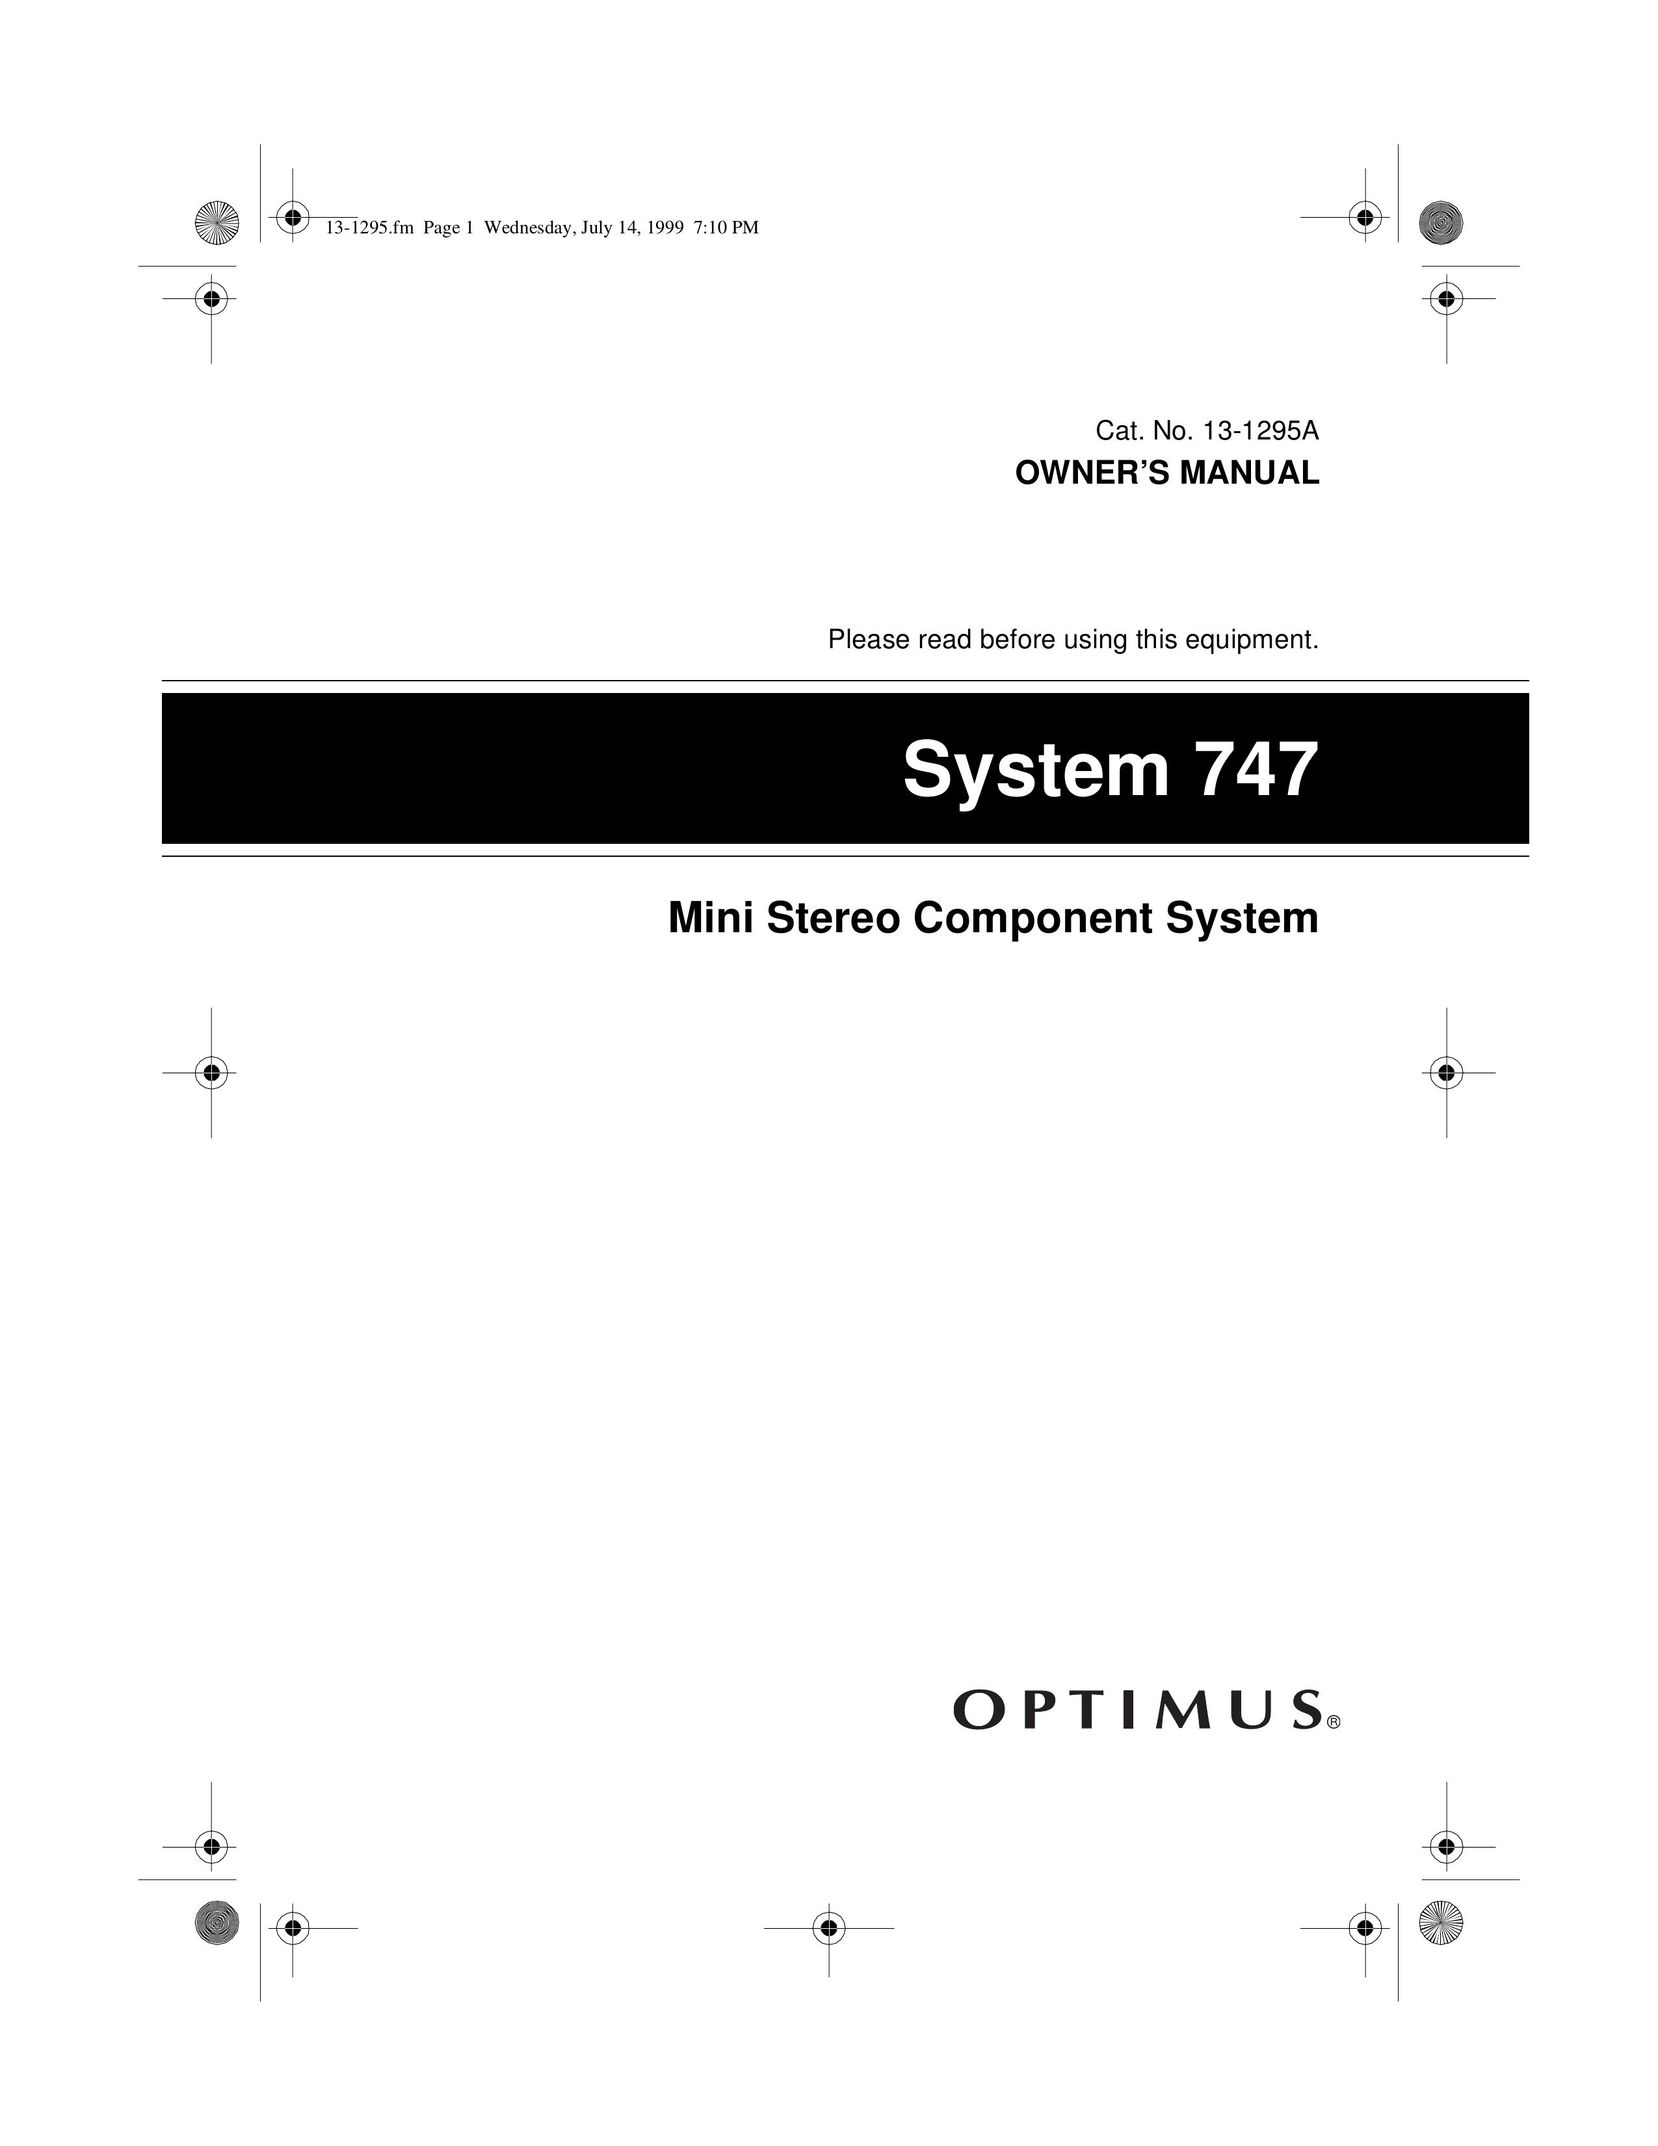 Optimus SYSTEM 747 Home Theater System User Manual